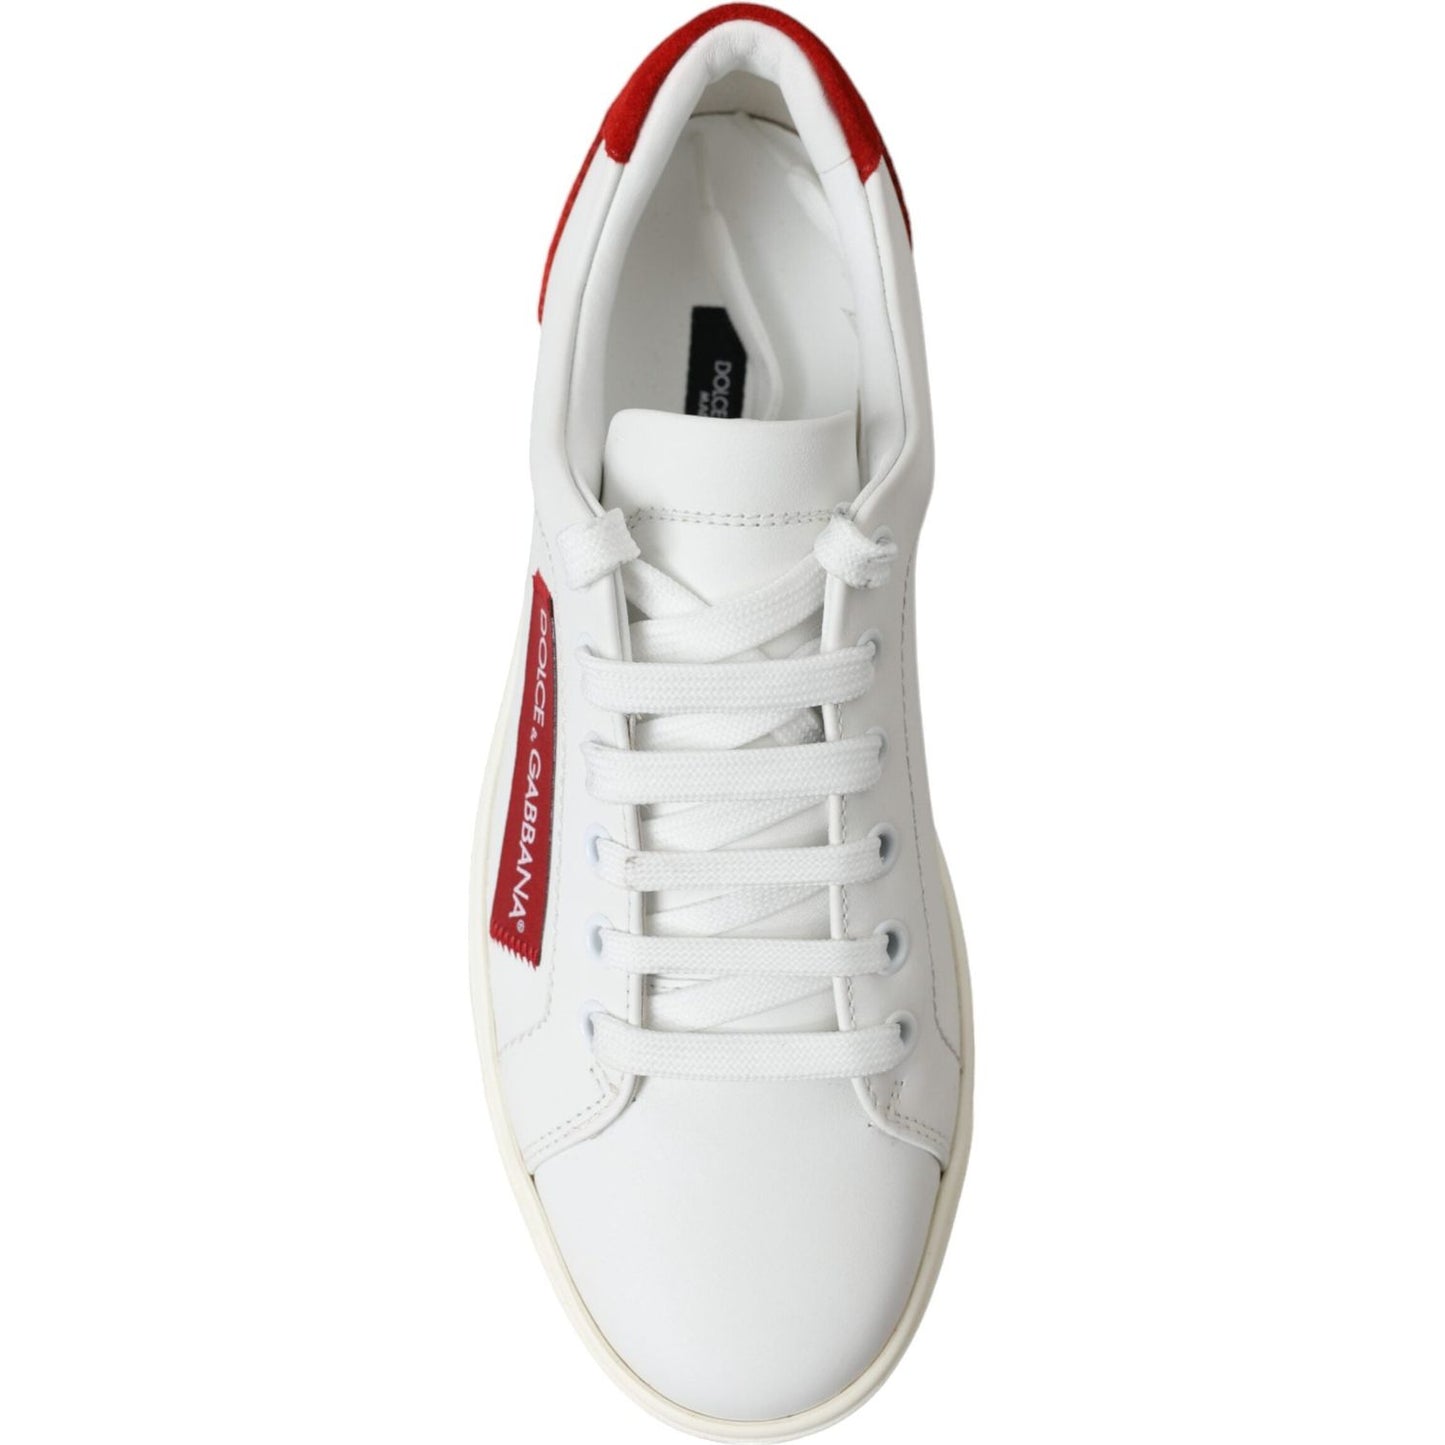 Dolce & Gabbana Chic White Leather Sneakers with Red Accents white-red-leather-low-top-sneakers-shoes